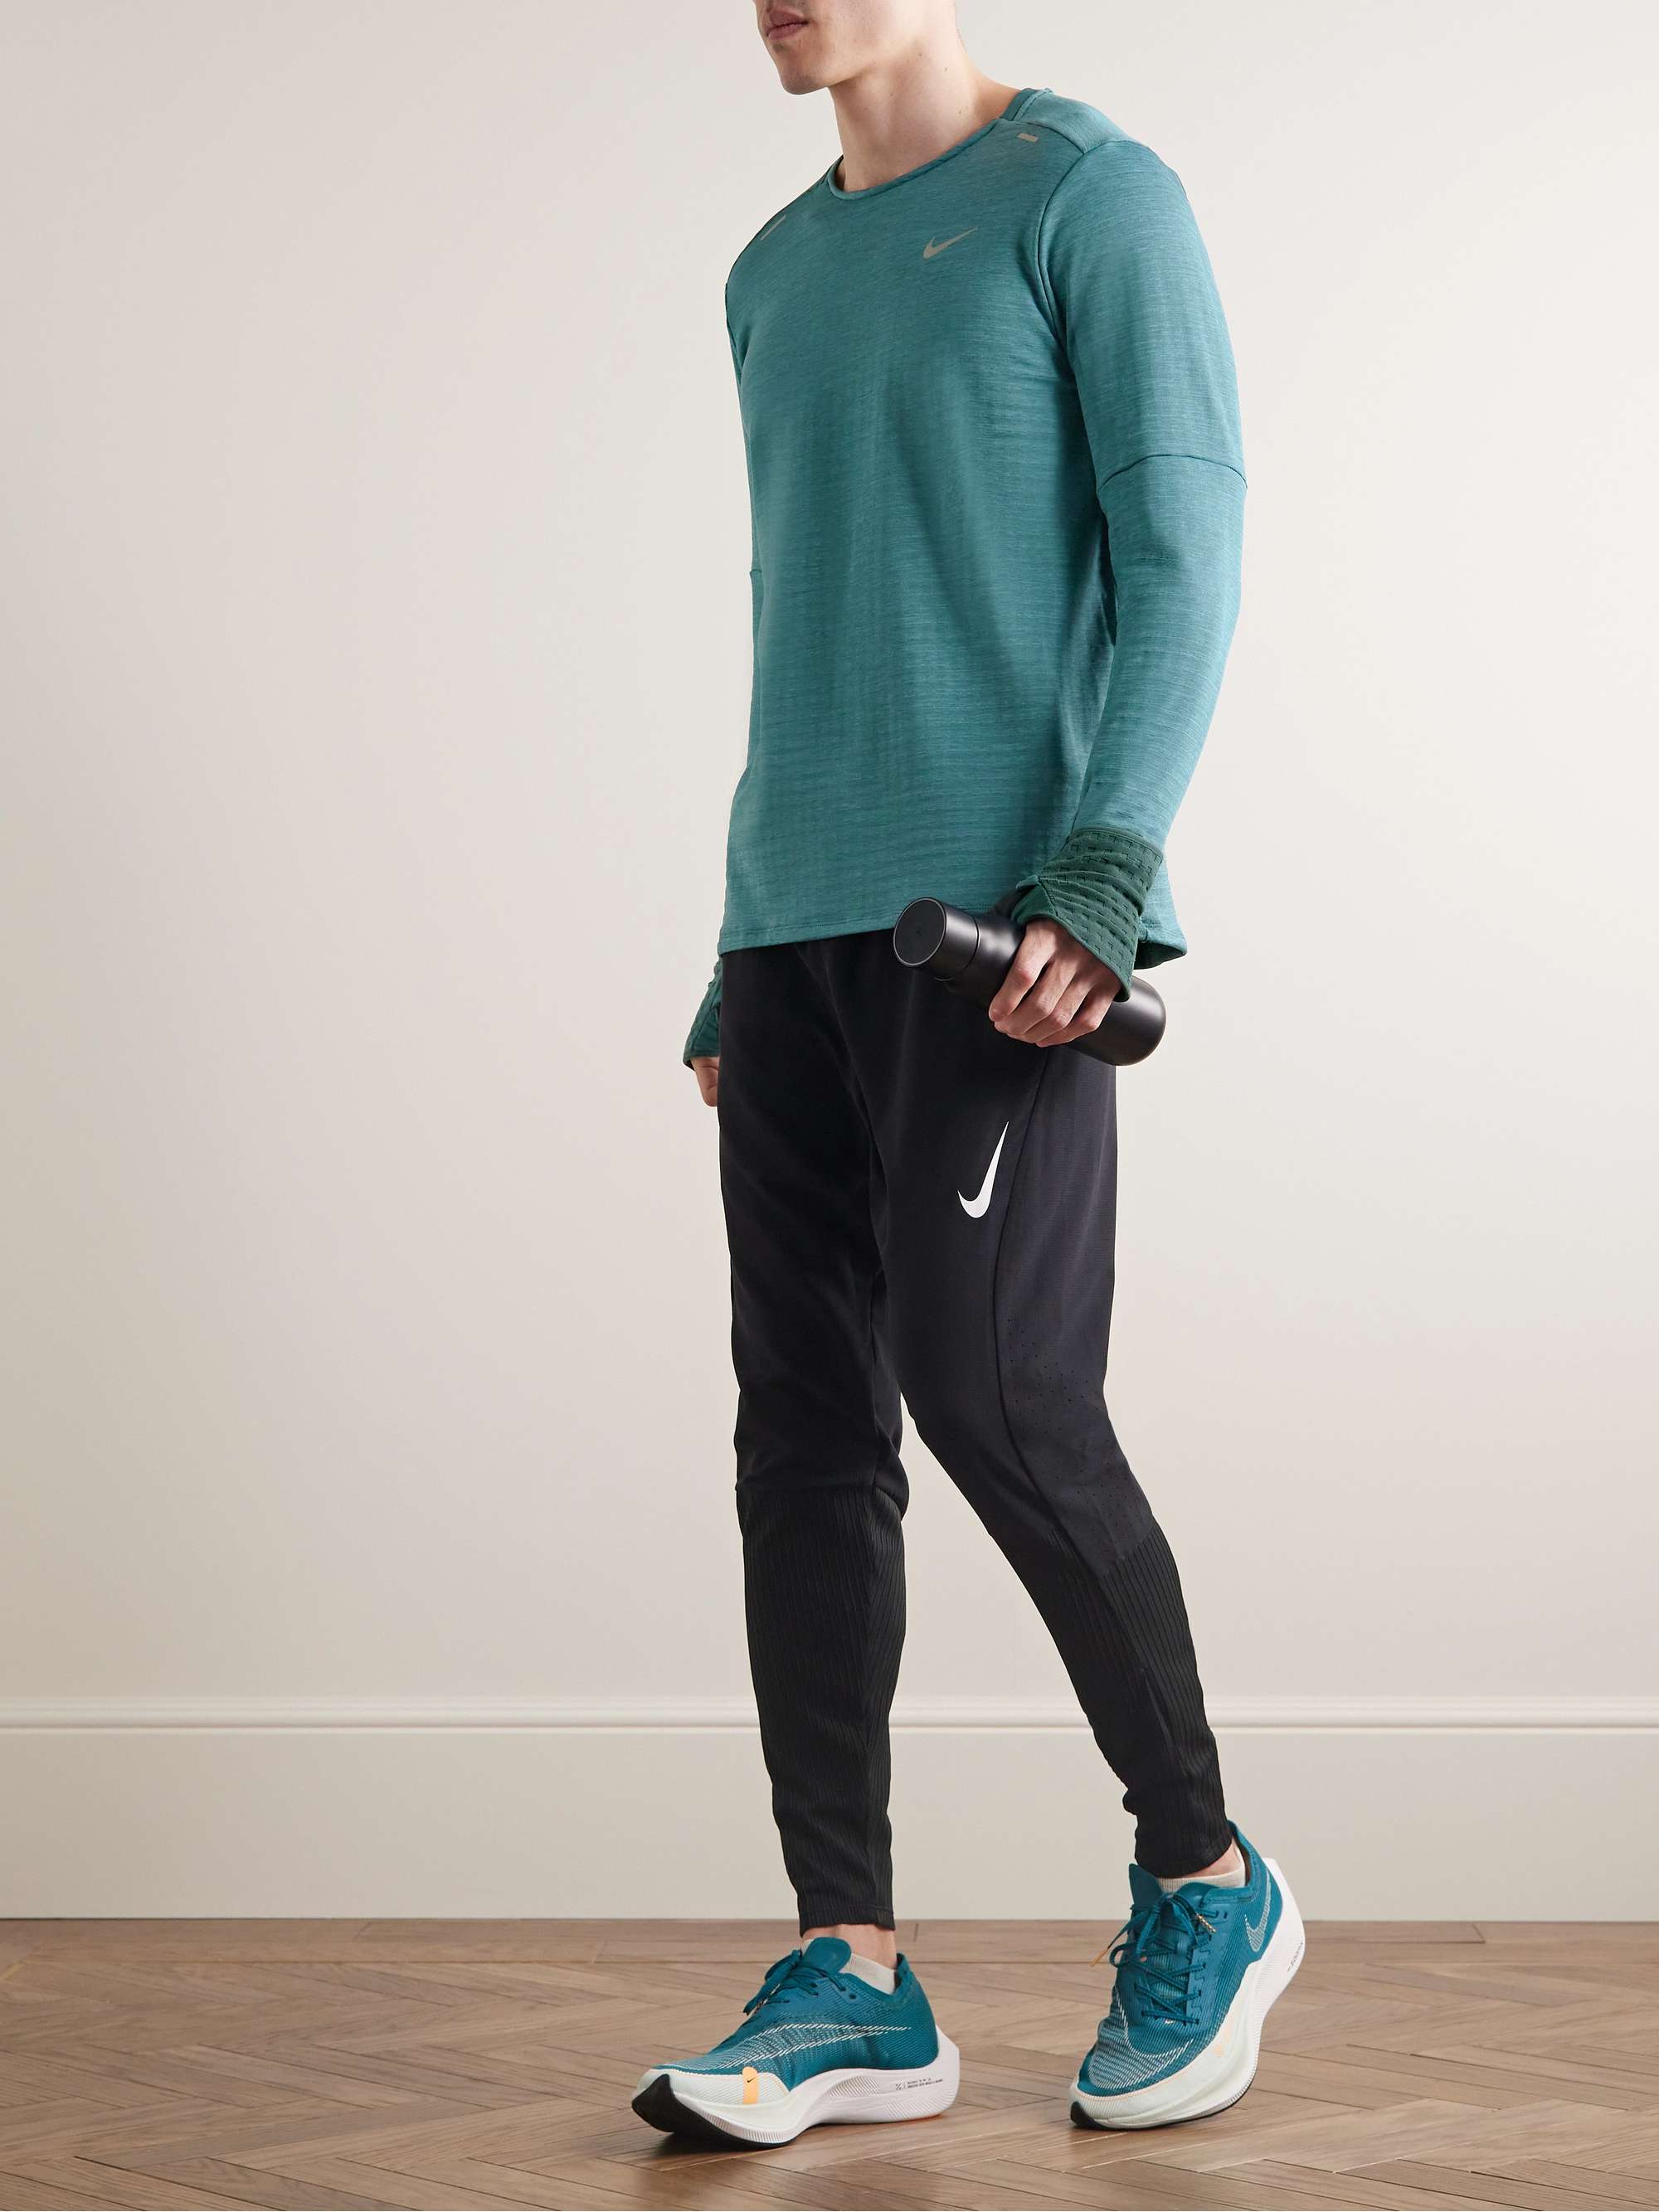 Blue Repel Element Therma-FIT Running Top | NIKE RUNNING | MR PORTER